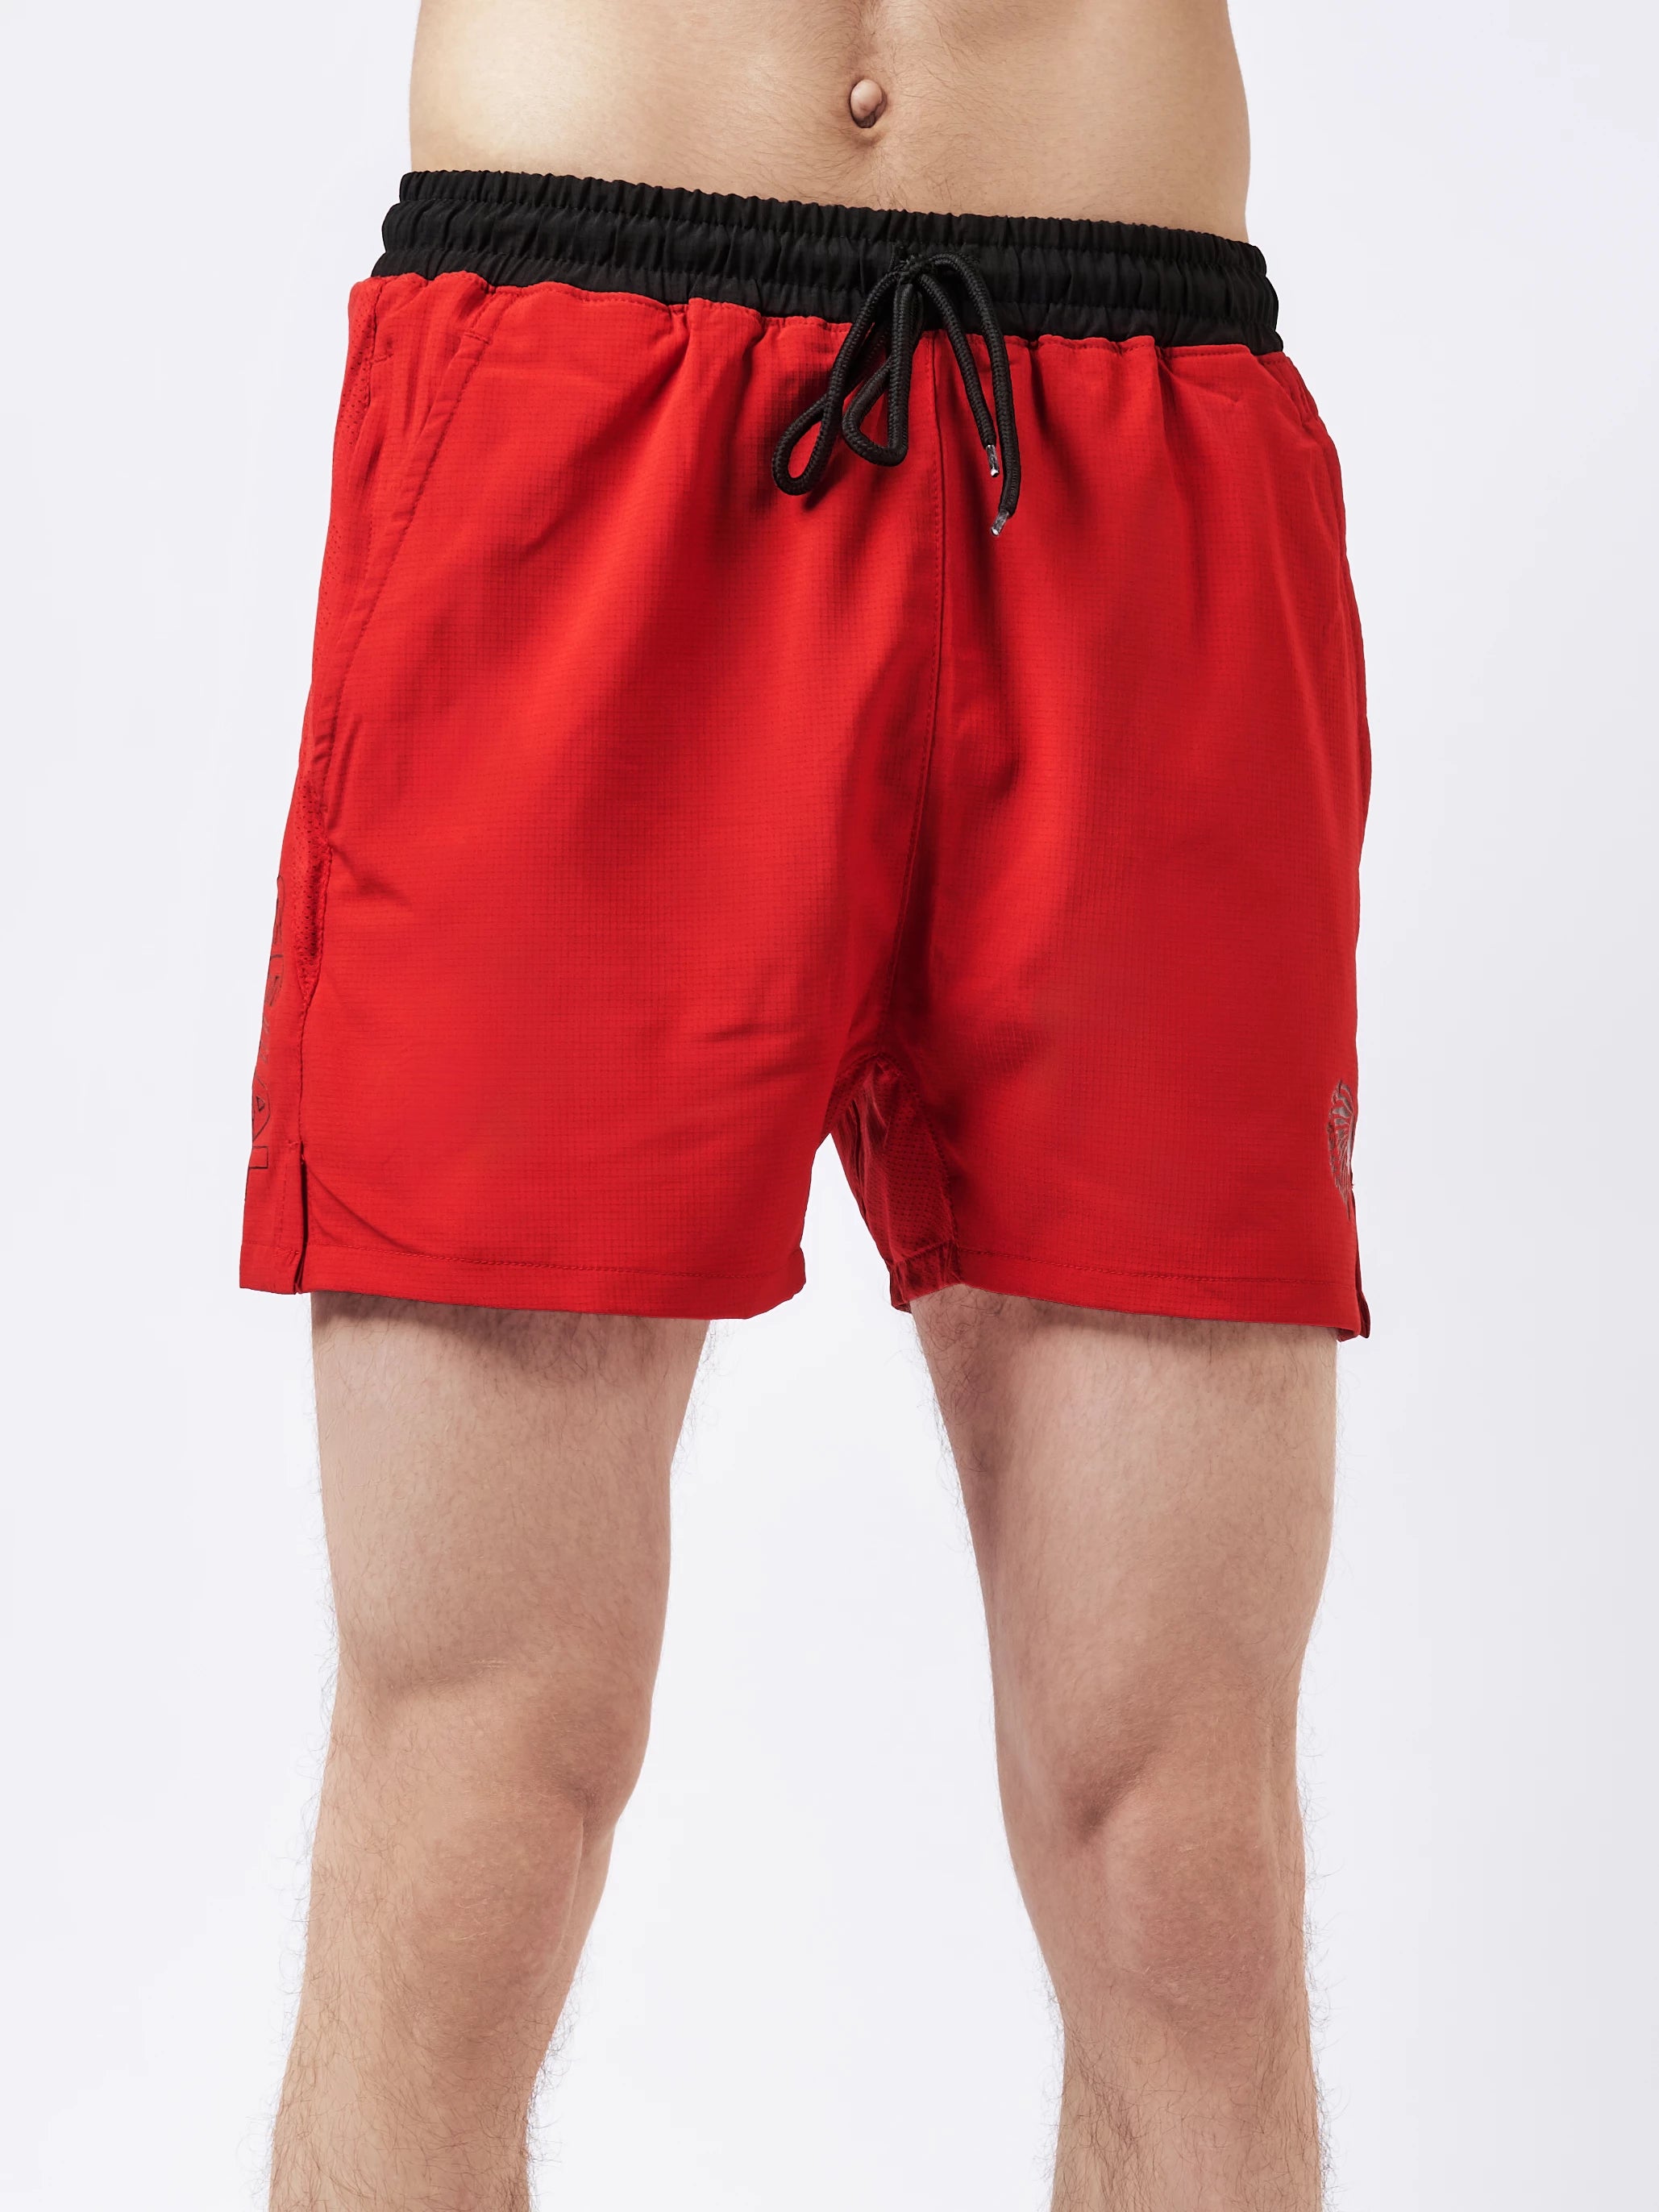 Men's Shorts Red